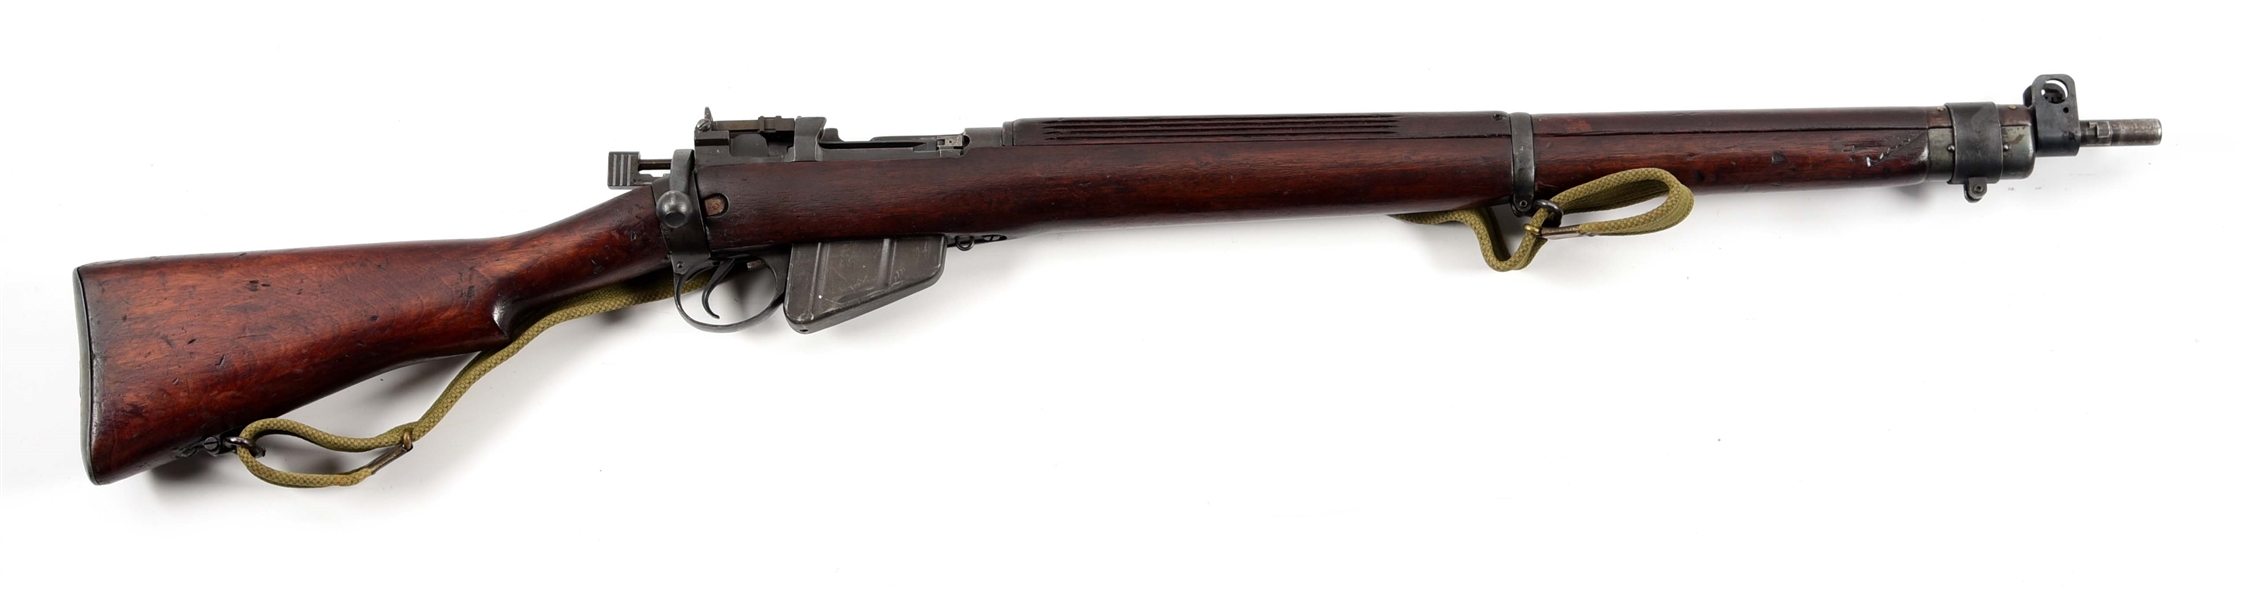 (C) LONG BRANCH NO. 4 MKI* SOUTH AFRICAN ENFIELD BOLT ACTION RIFLE.